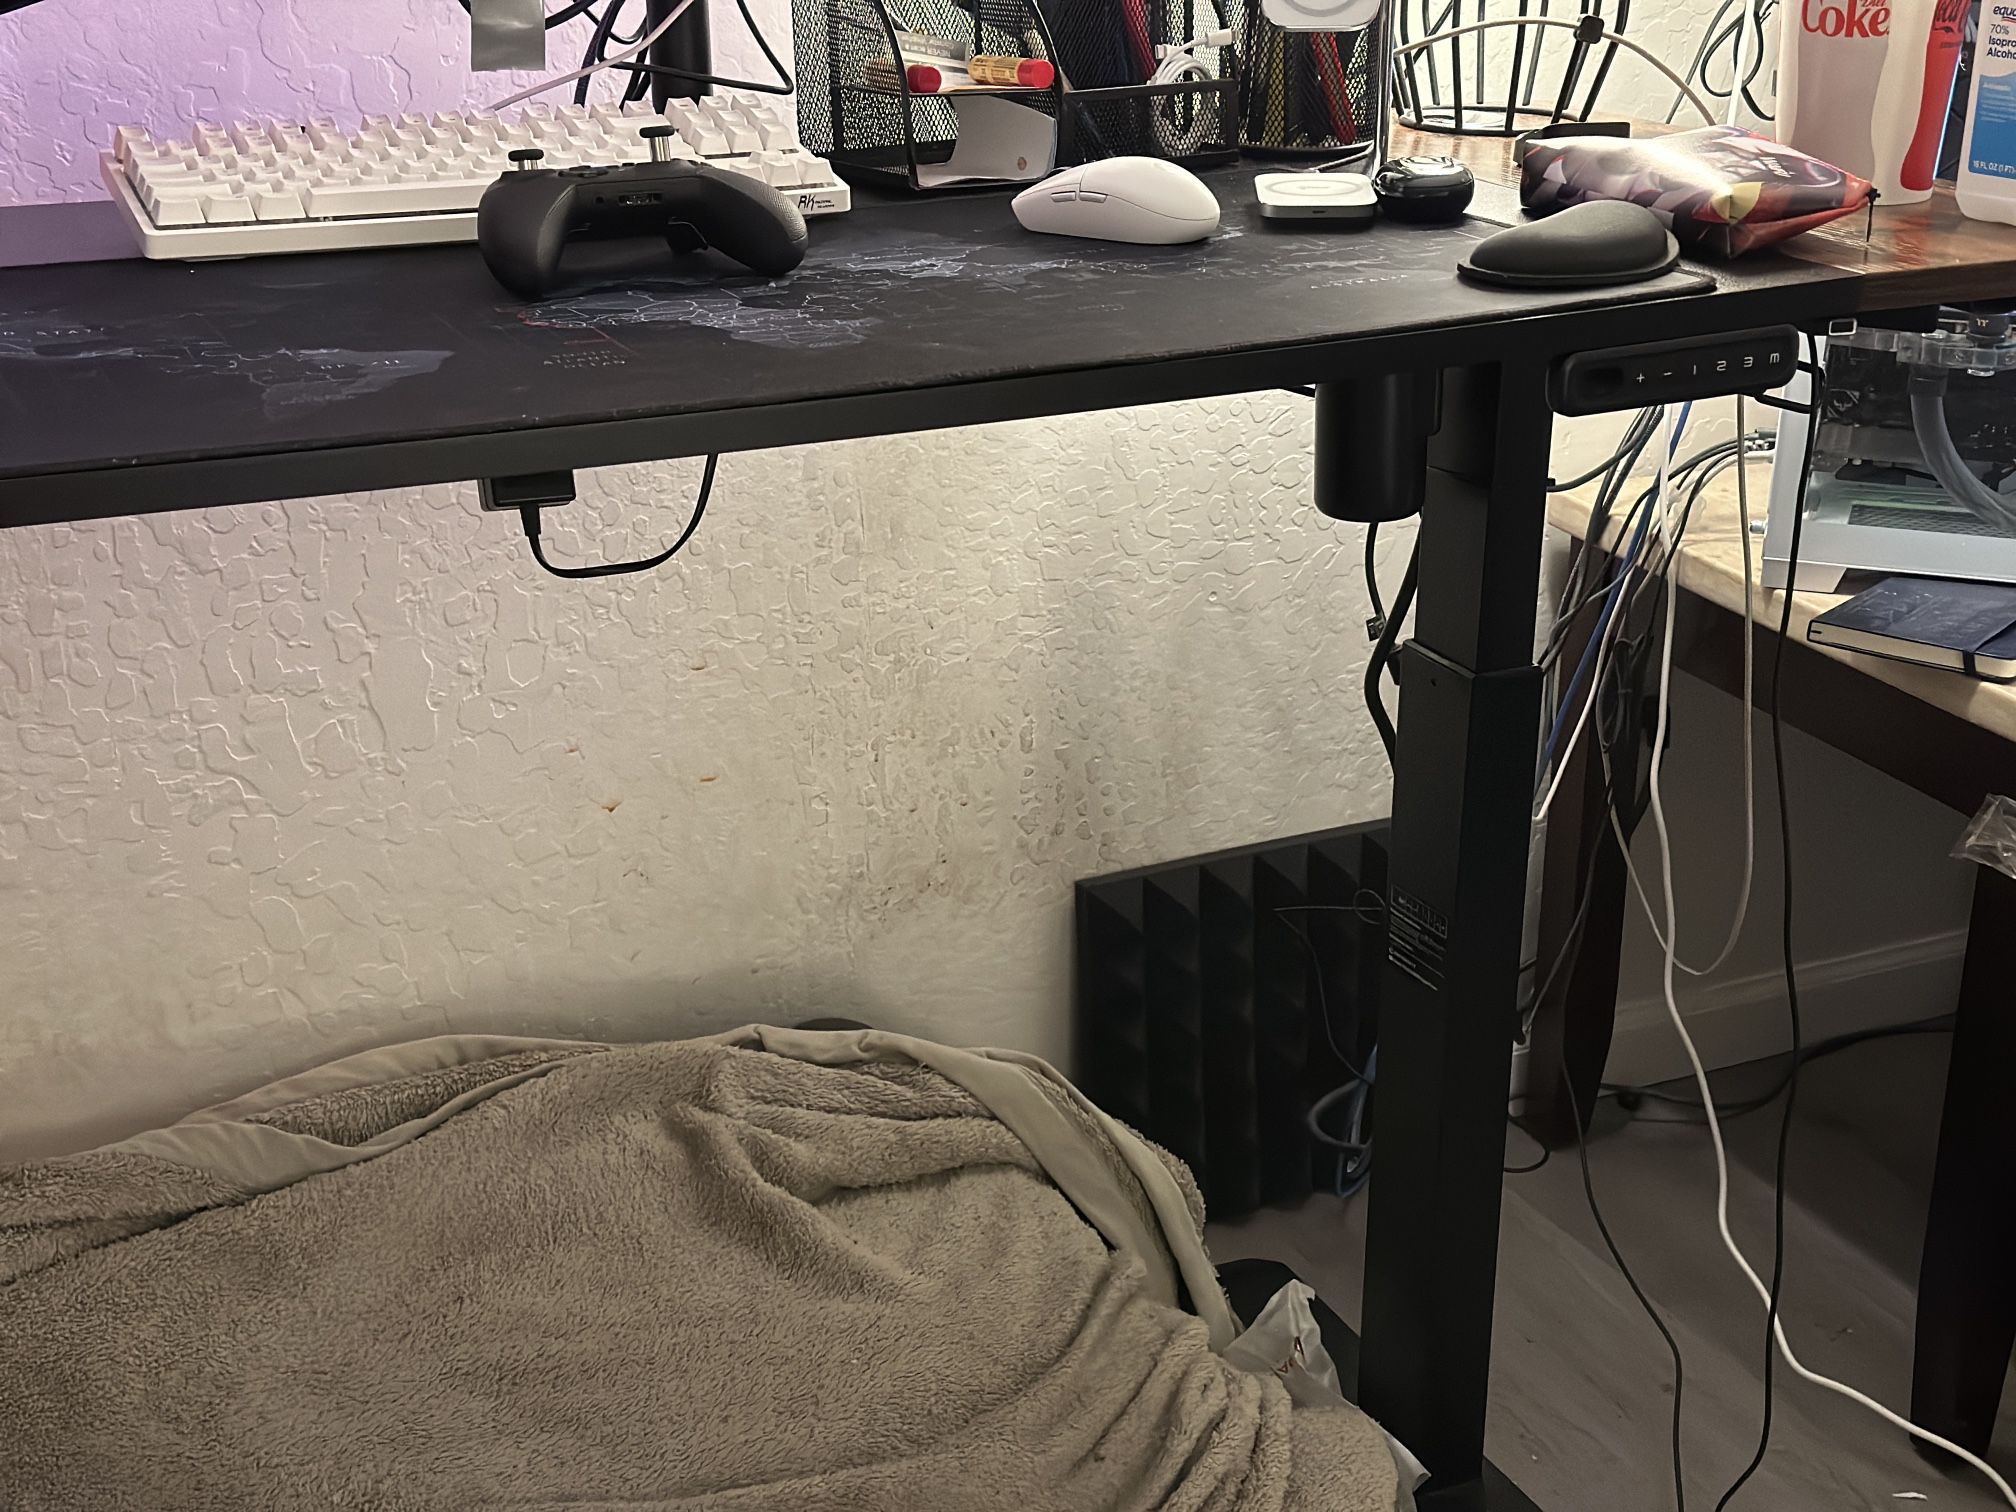 Mechanical Sit To Stand Desk